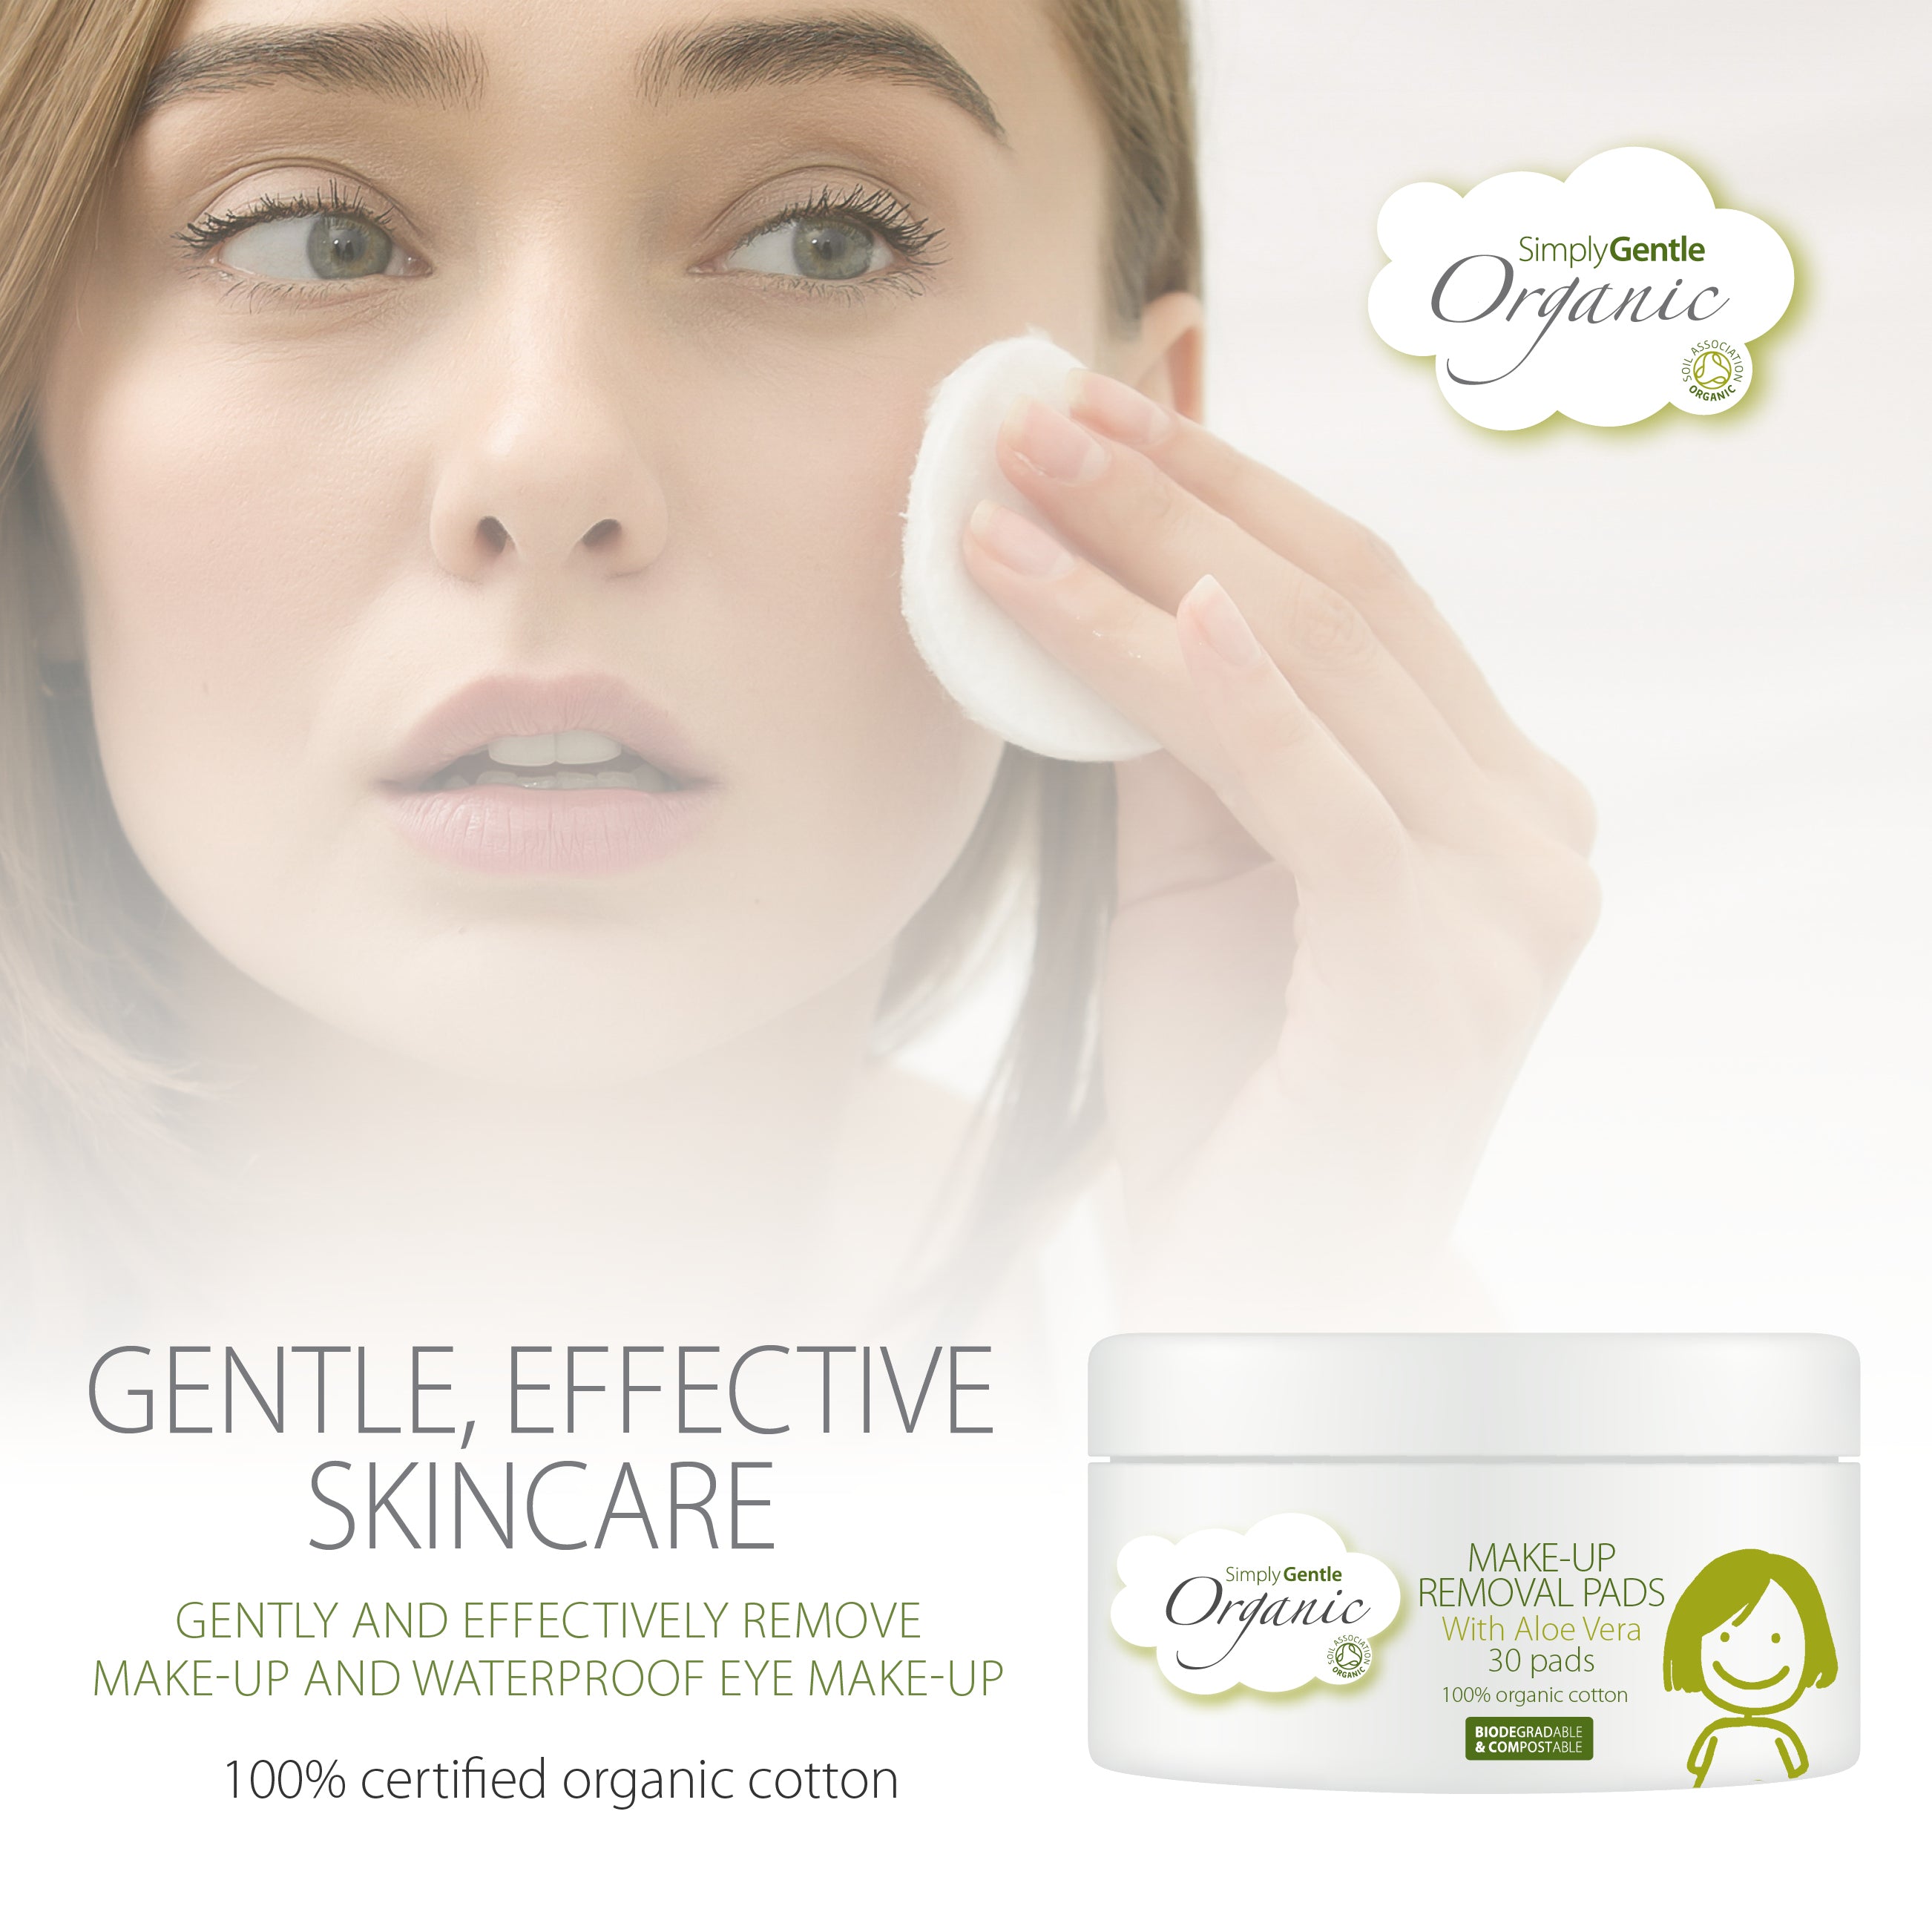 Simply Gentle Organic Makeup Removal Pads